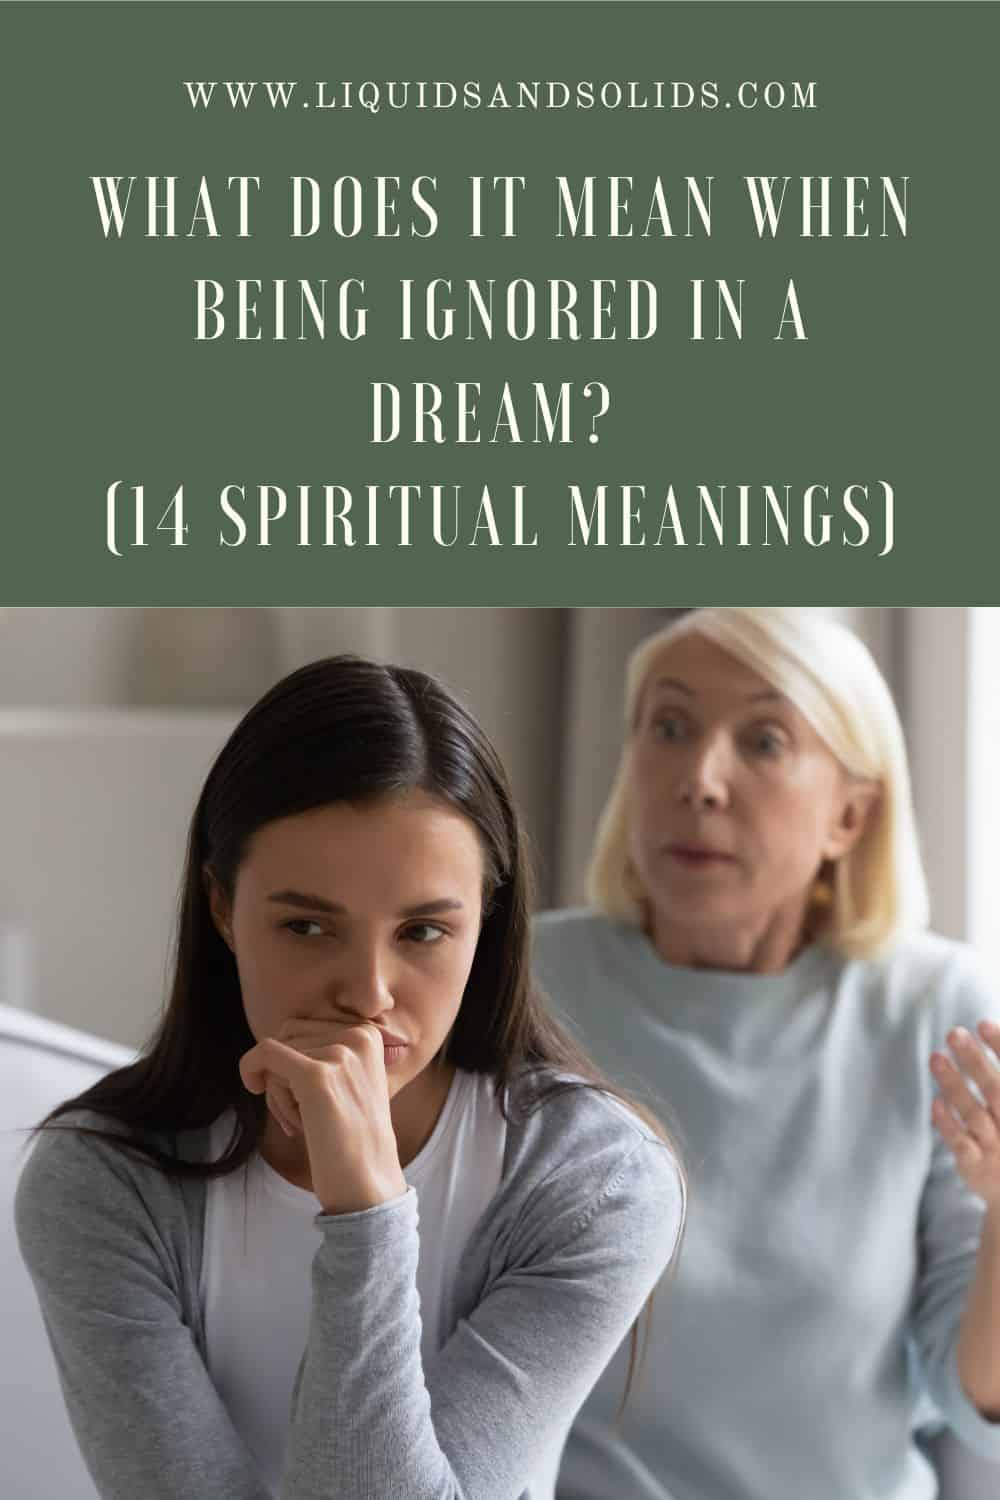 What Does It Mean When Being Ignored In A Dream? (14 Spiritual Meanings)